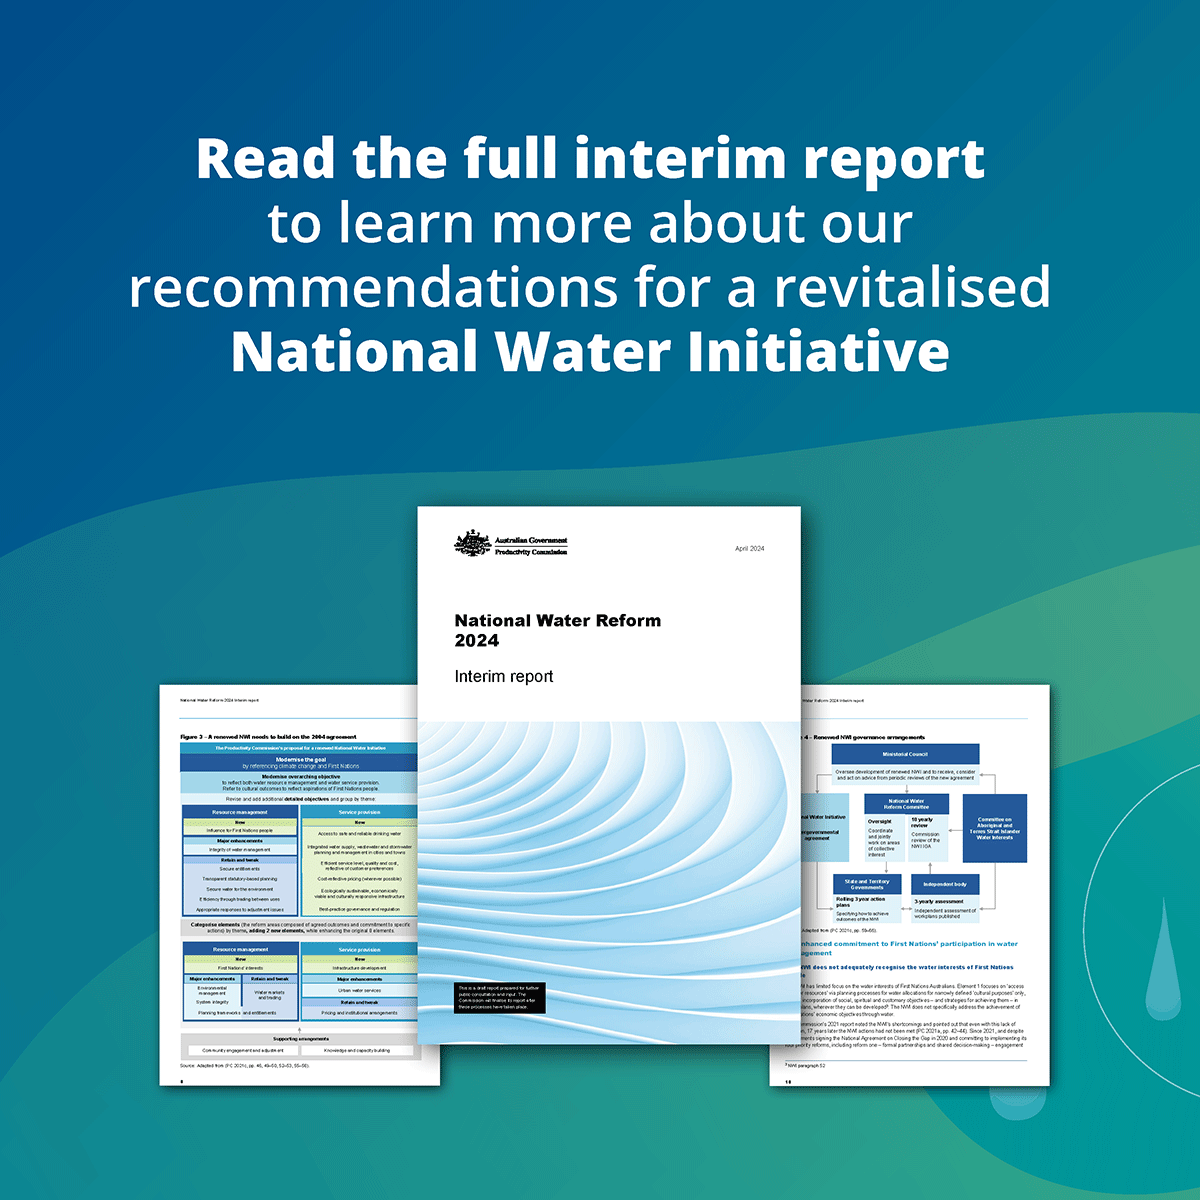 Read the full interim report to learn more about our recommendations for a revitalised National Water Initiative.